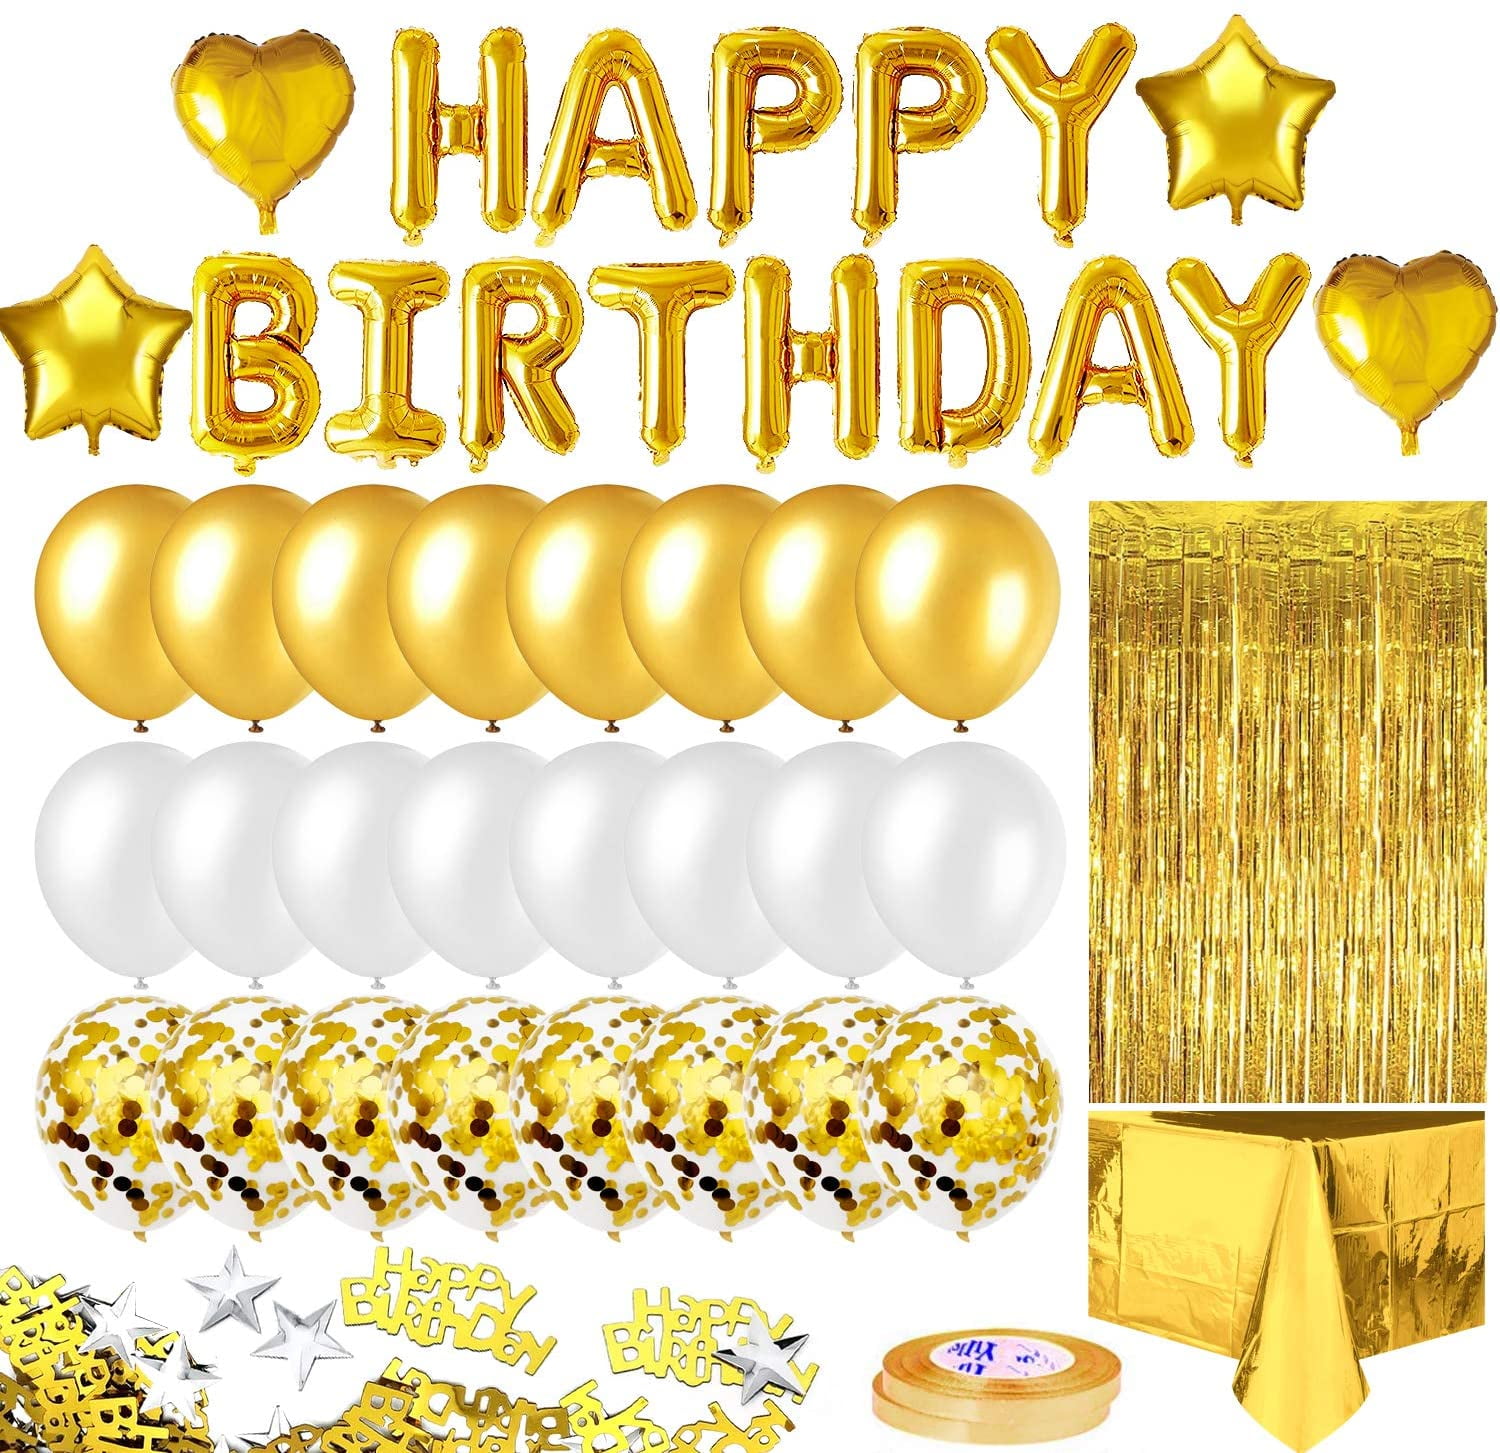 Balloons 93rd Party Supplies 40 Number Balloons Gold & White 93rd Birthday Decorations for Women Pom Poms Banner Foil Curtains